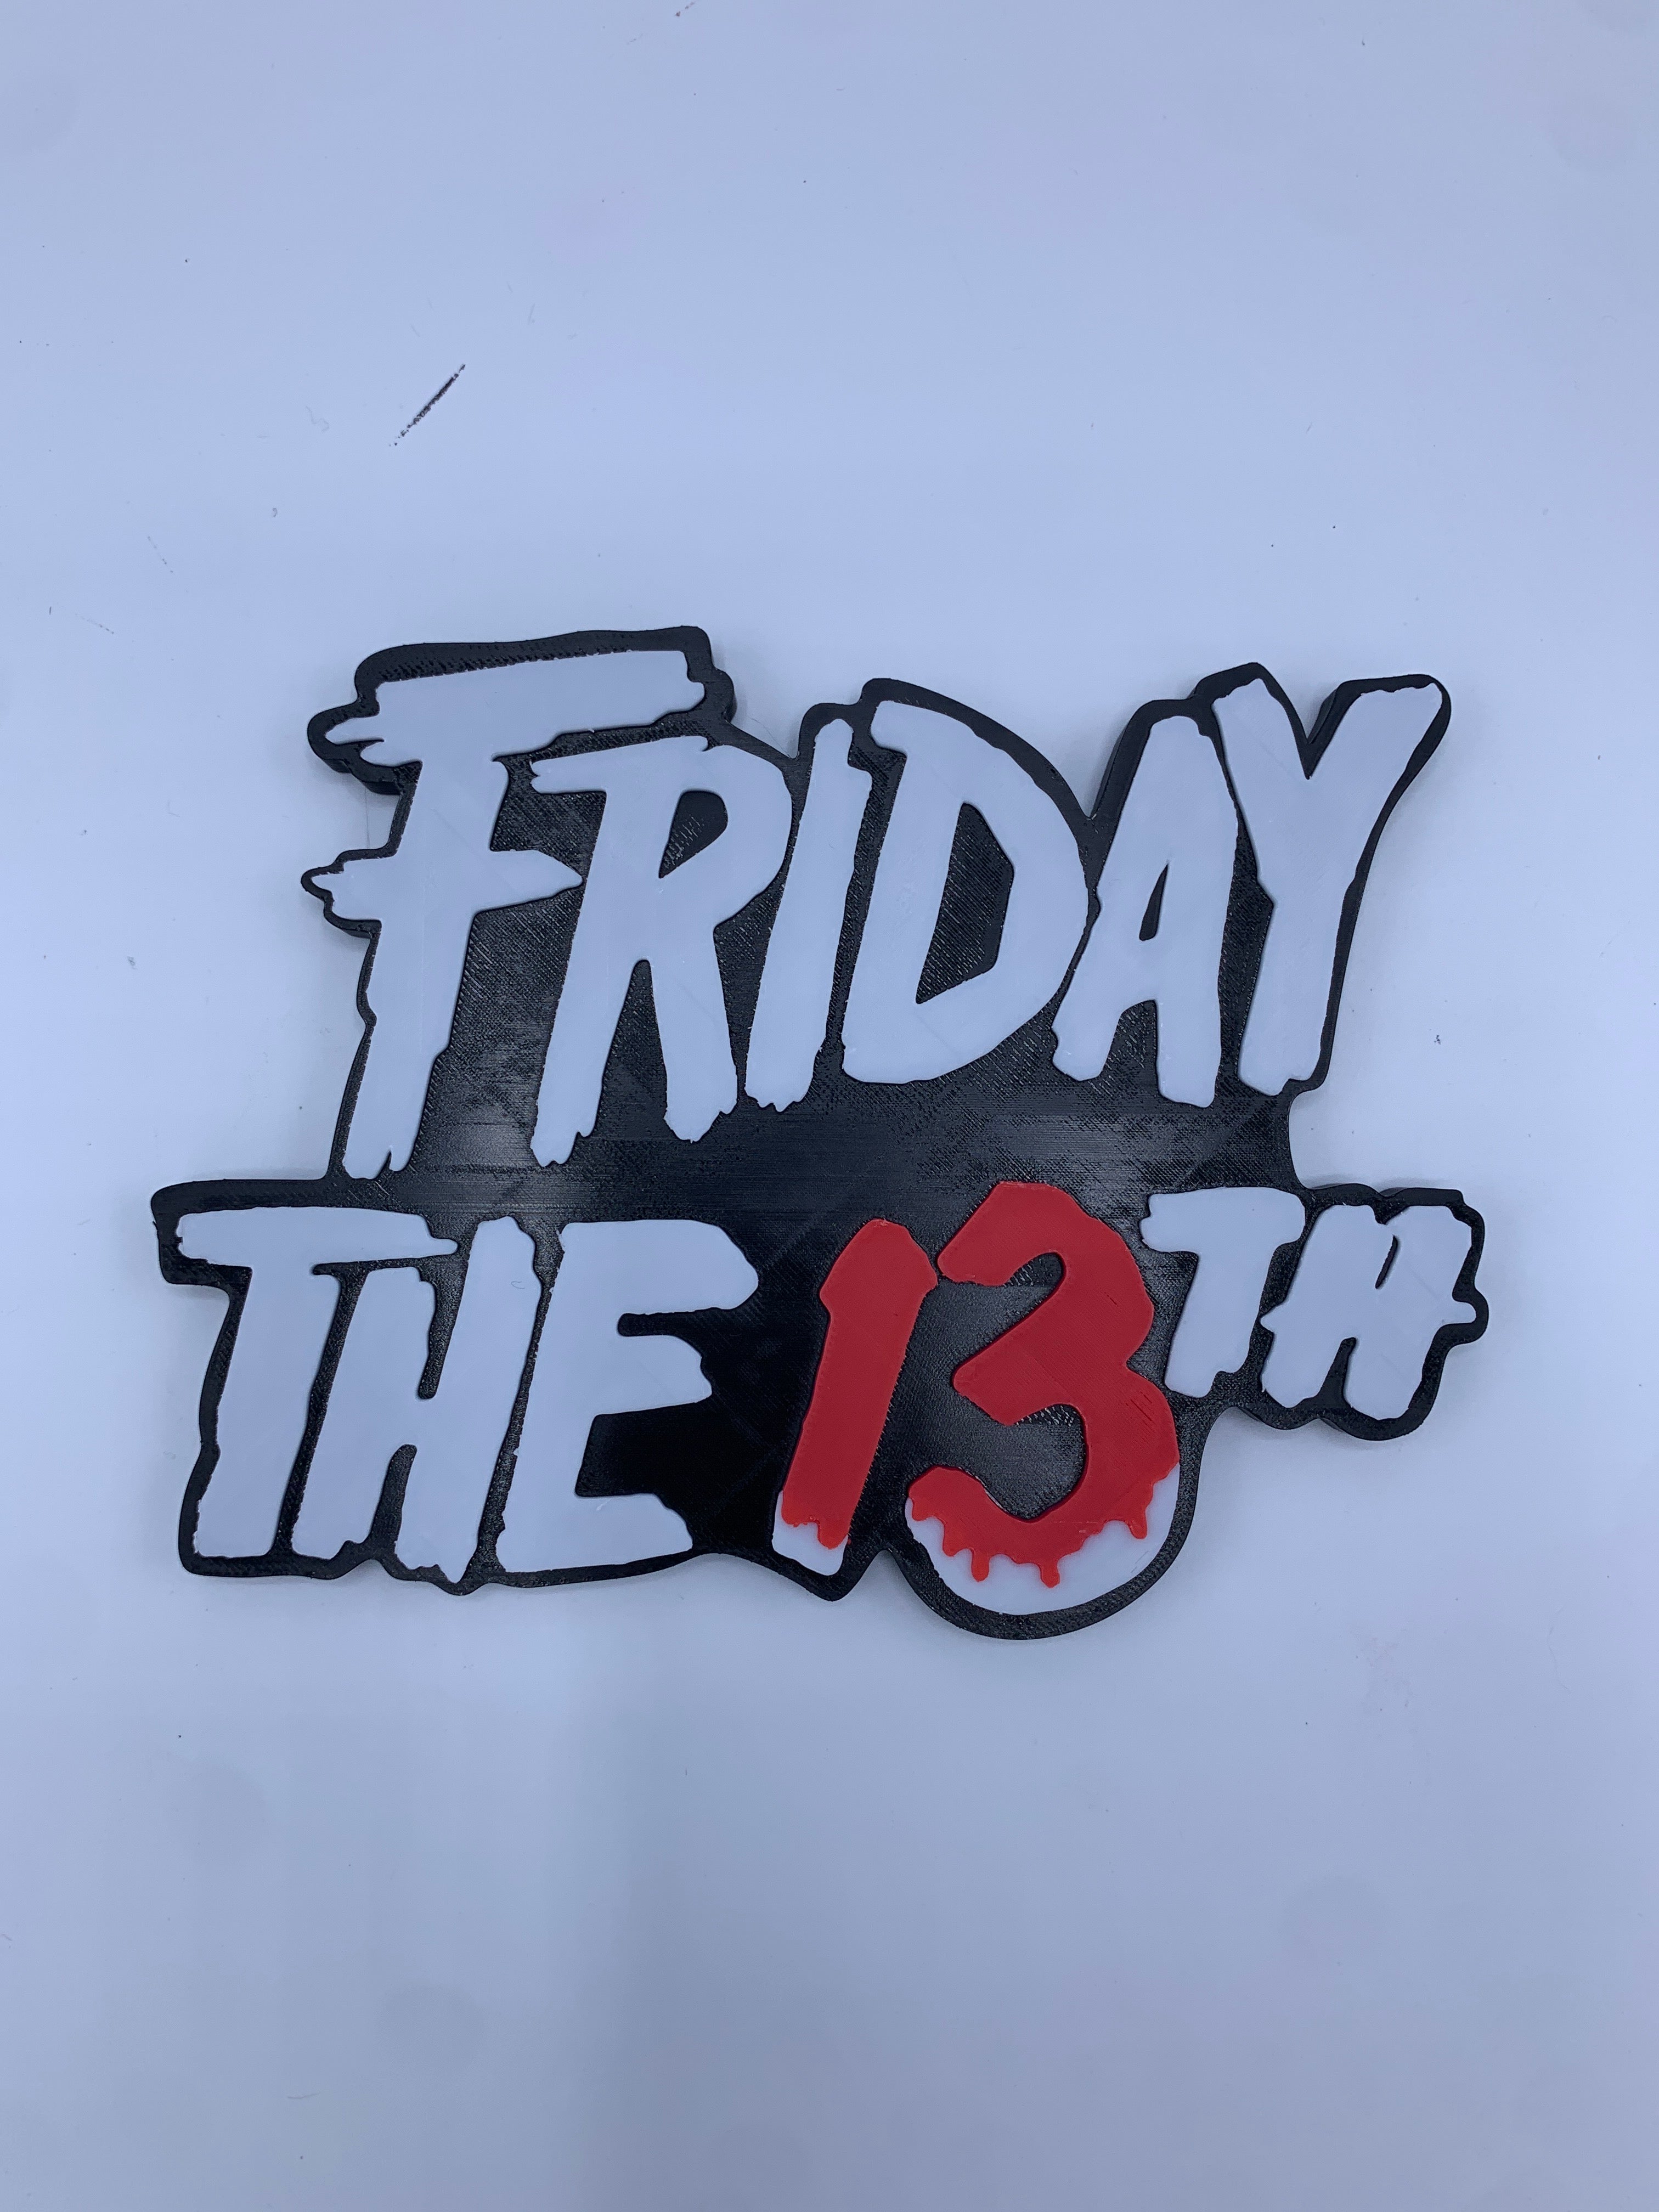 Friday the 13th sign